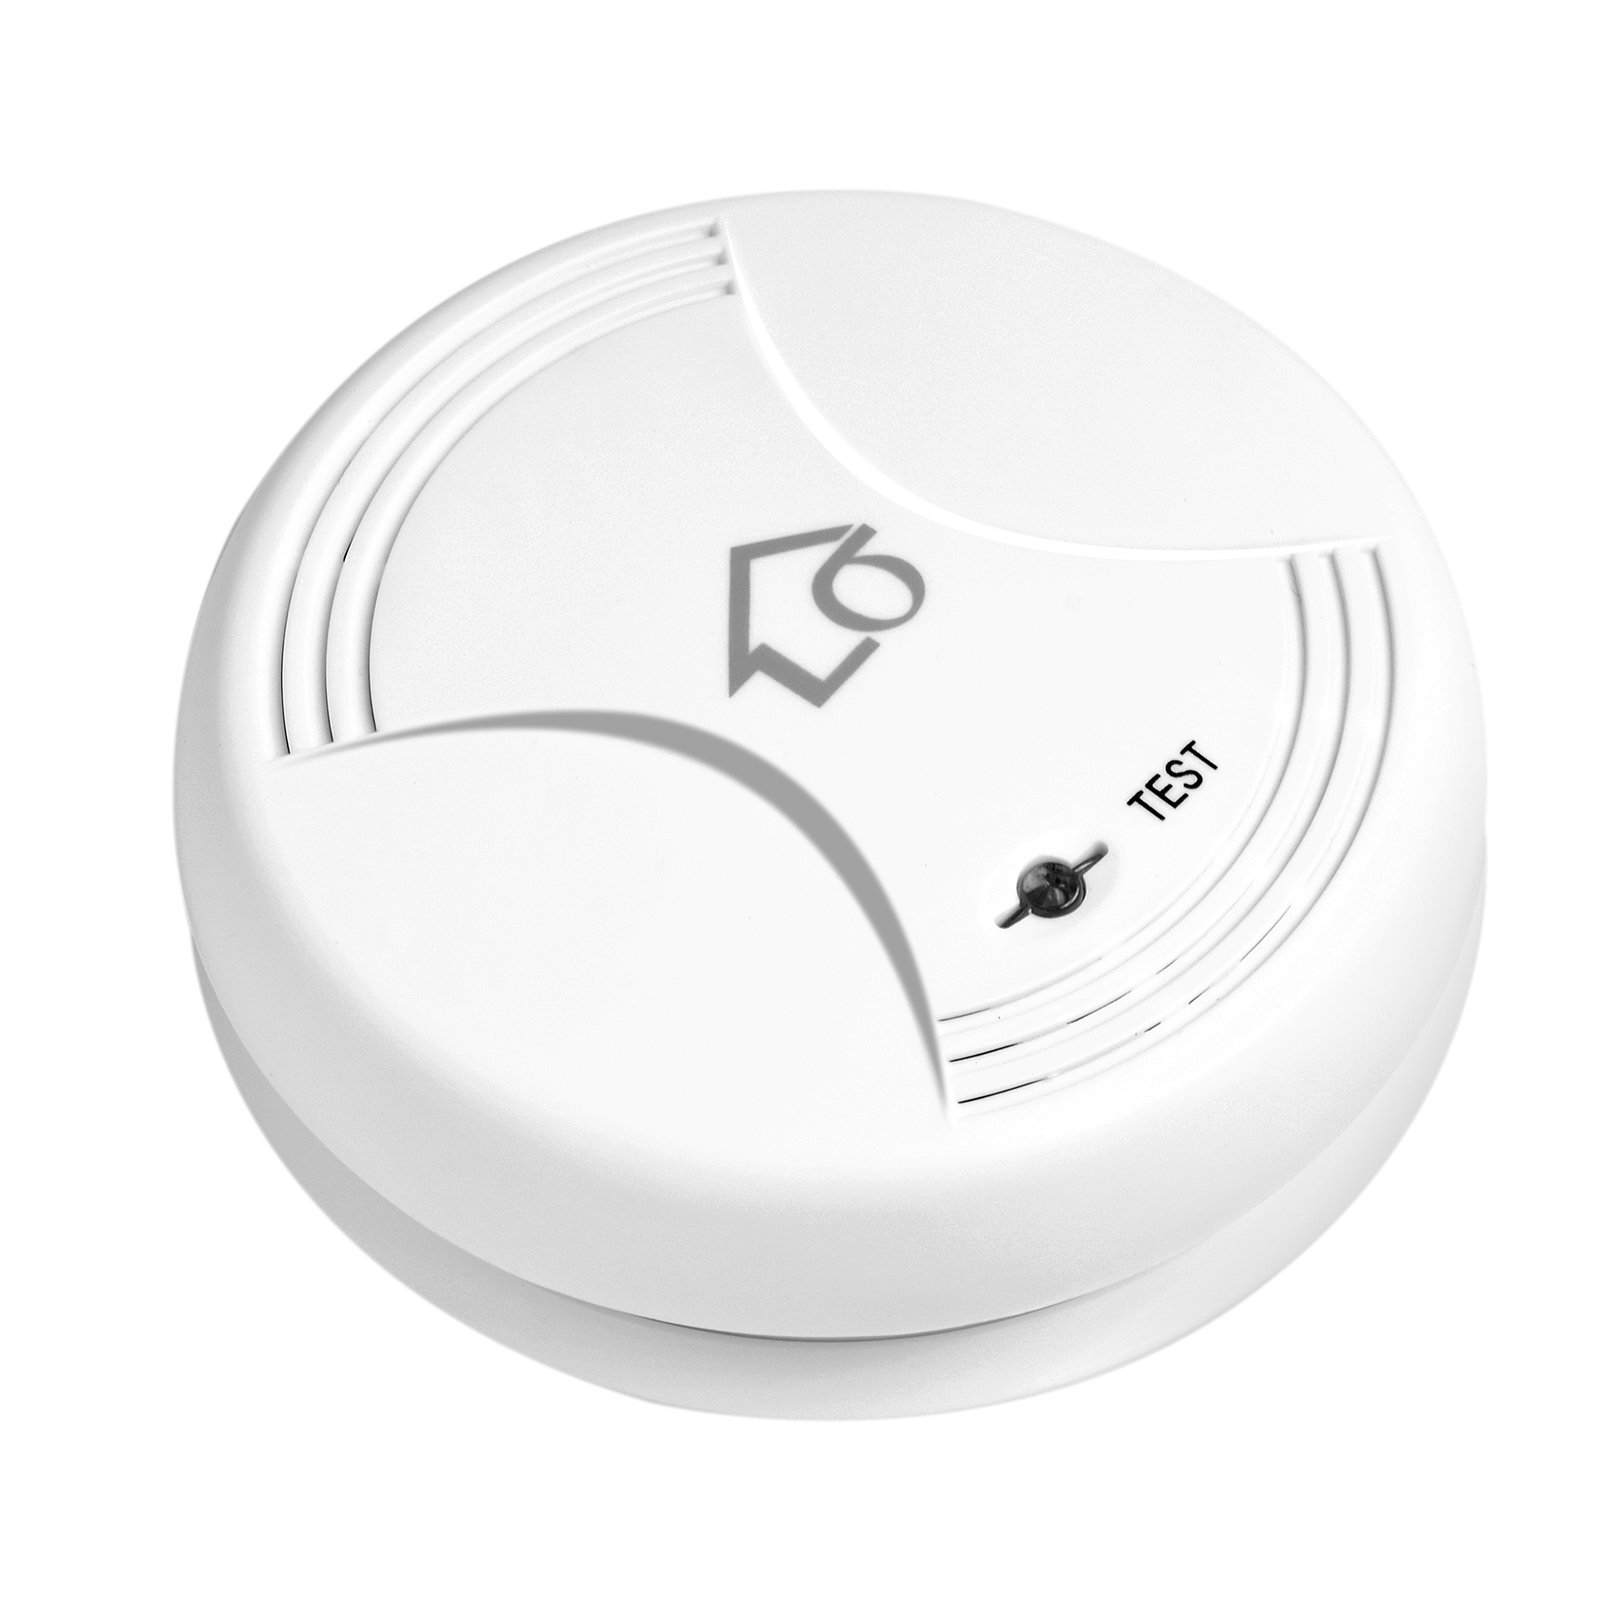 Wireless Fire Protection Smoke/Fire Detector Alarm Sensors For Home Security Alarm System